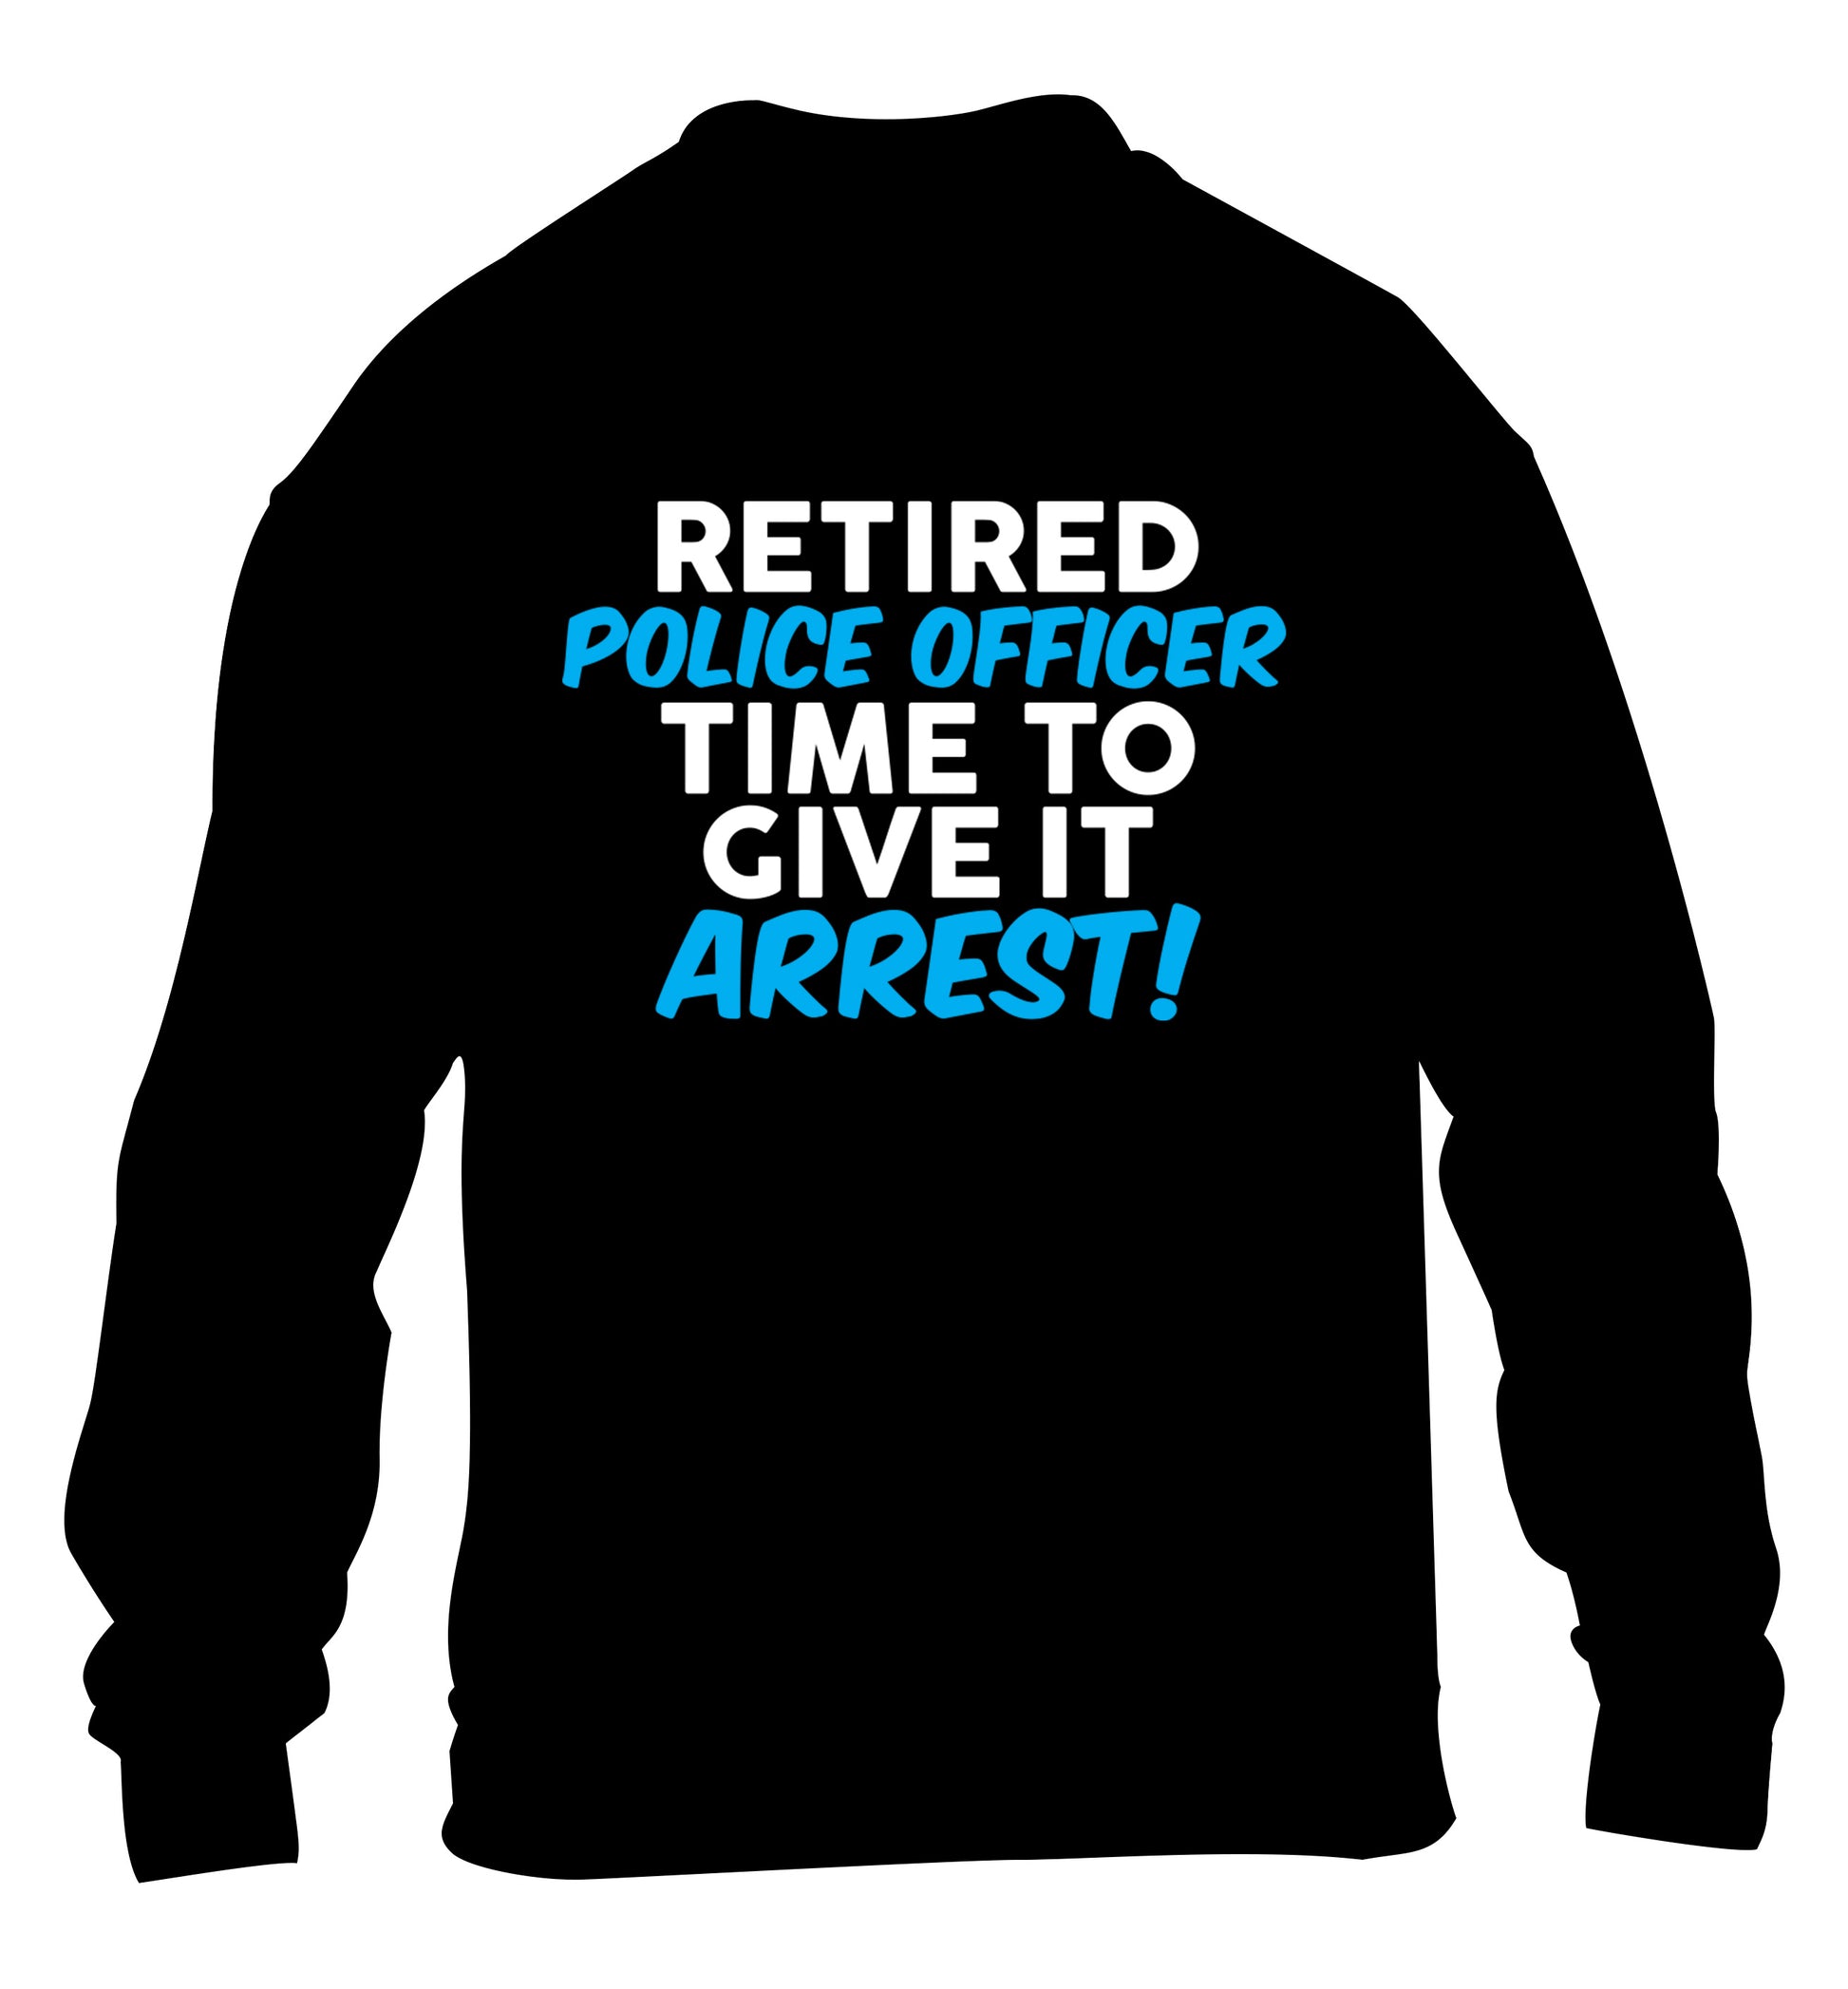 Retired police officer time to give it arrest children's black sweater 12-13 Years